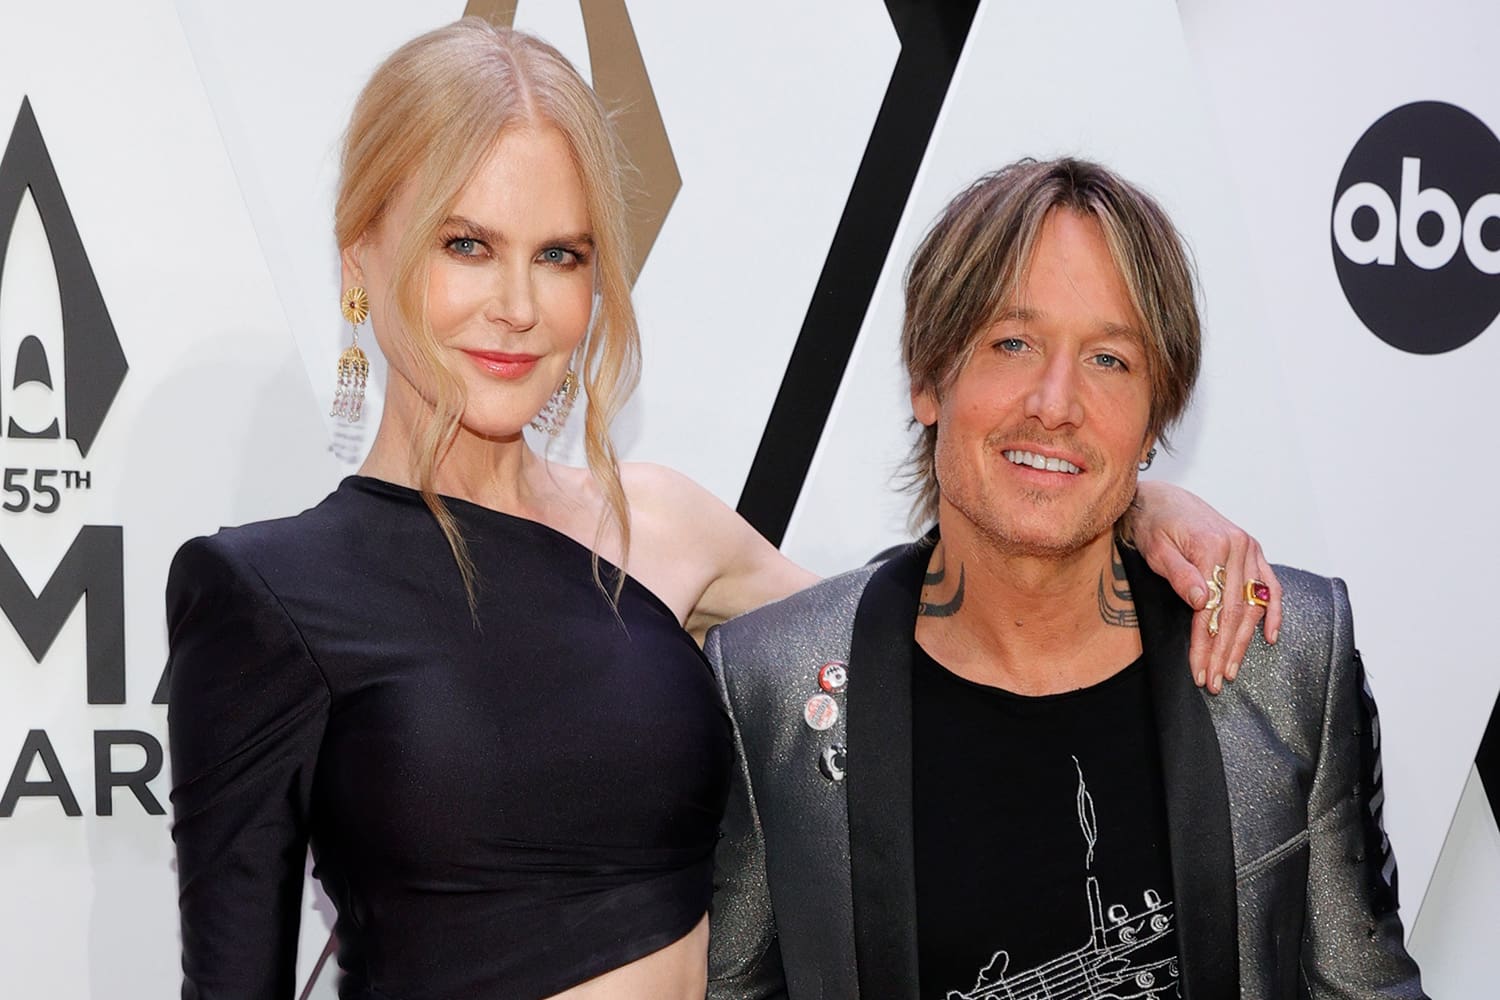 nicole-kidman-shows-pda-with-hubby-keith-urban-mid-concert-and-fans-love-it